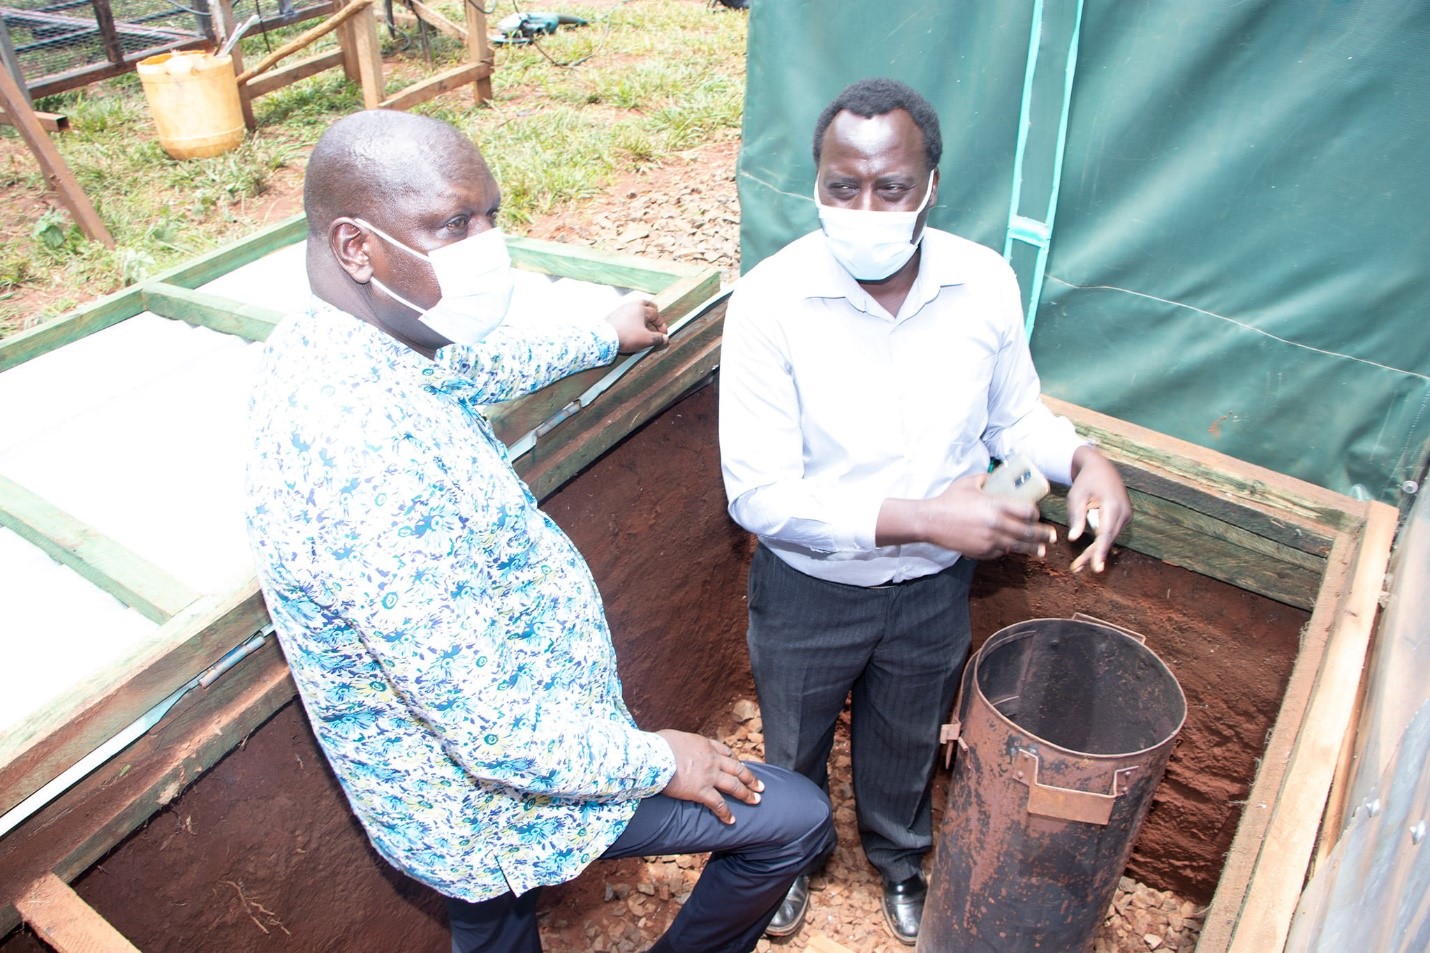 Dr. Muchilwa (innovator) explains to Prof. Kosgey (vice chancellor - Moi University) how the dryer works